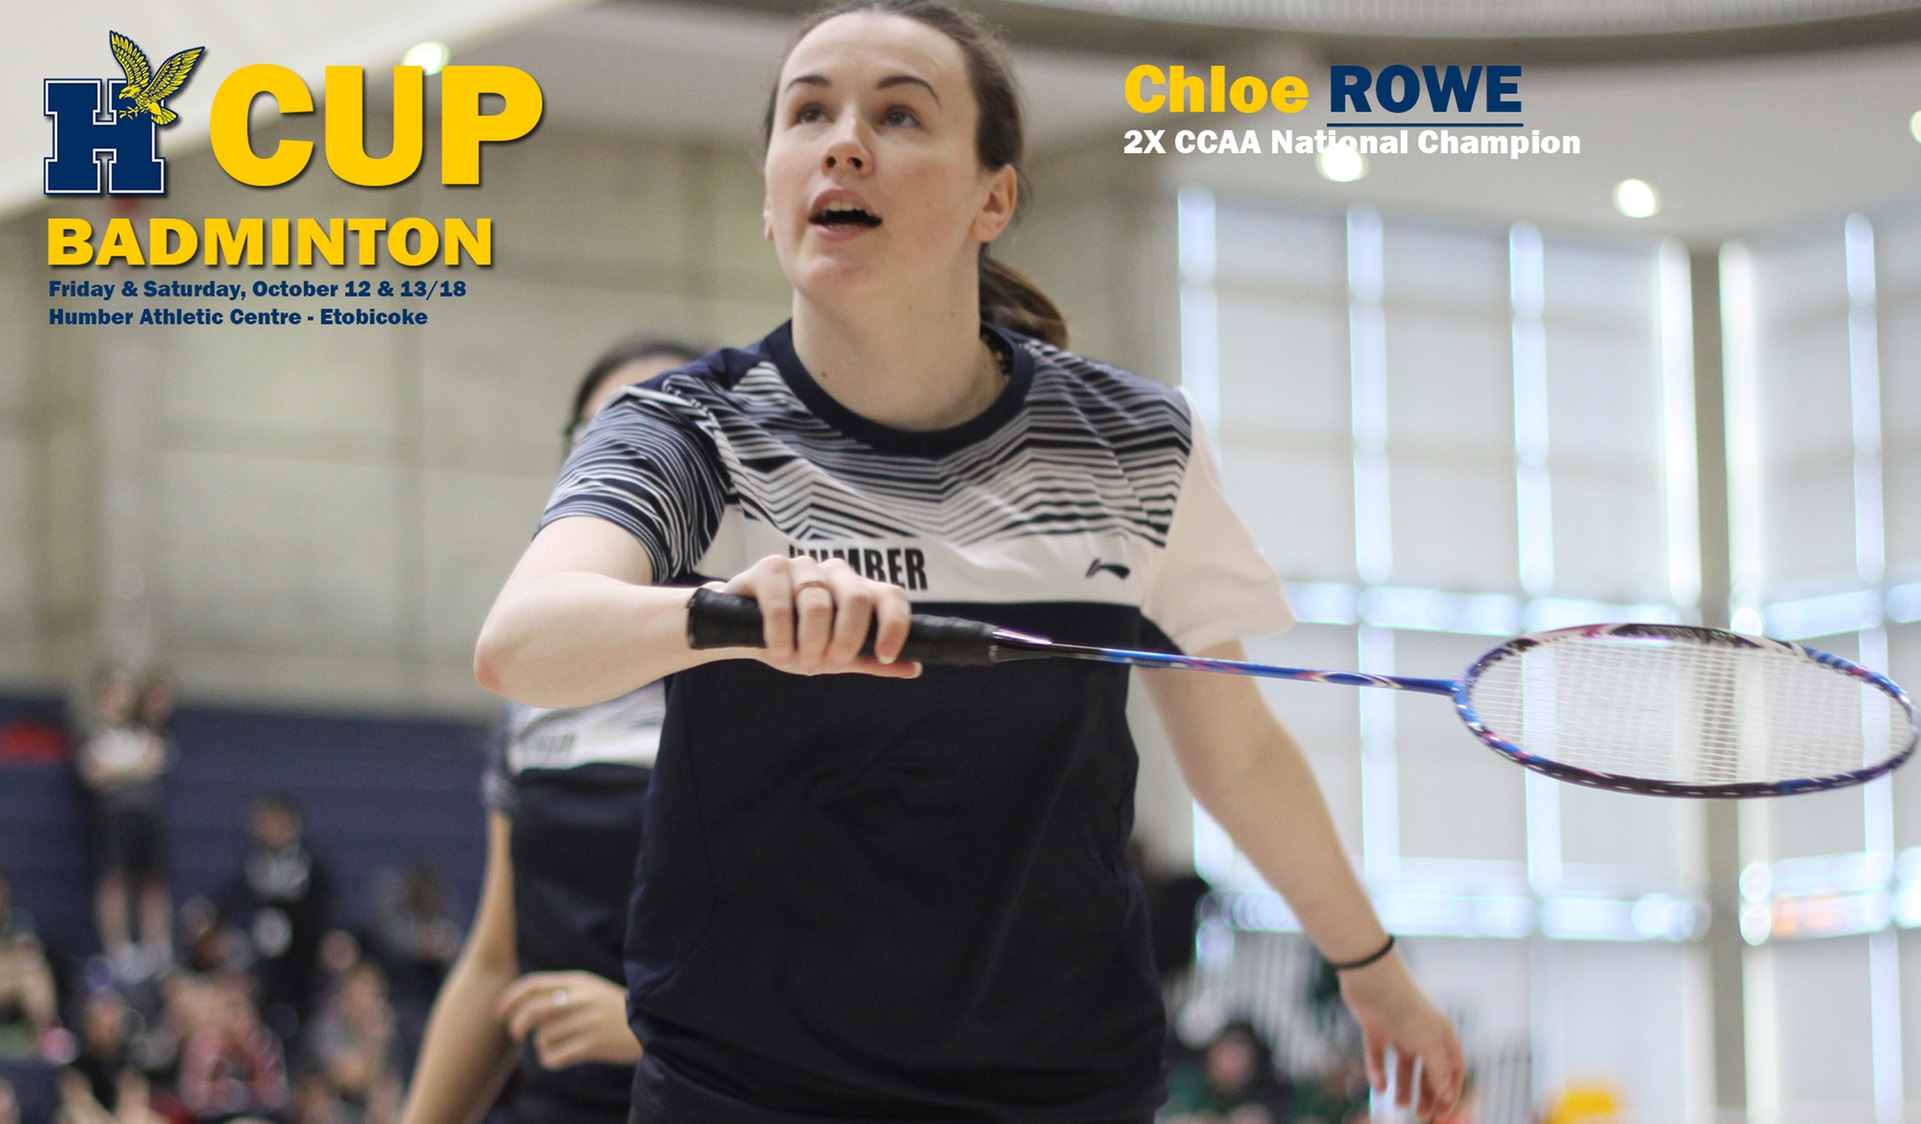 HAWKS HOST 2018 HUMBER CUP THIS WEEKEND AT HUMBER ATHLETIC CENTRE